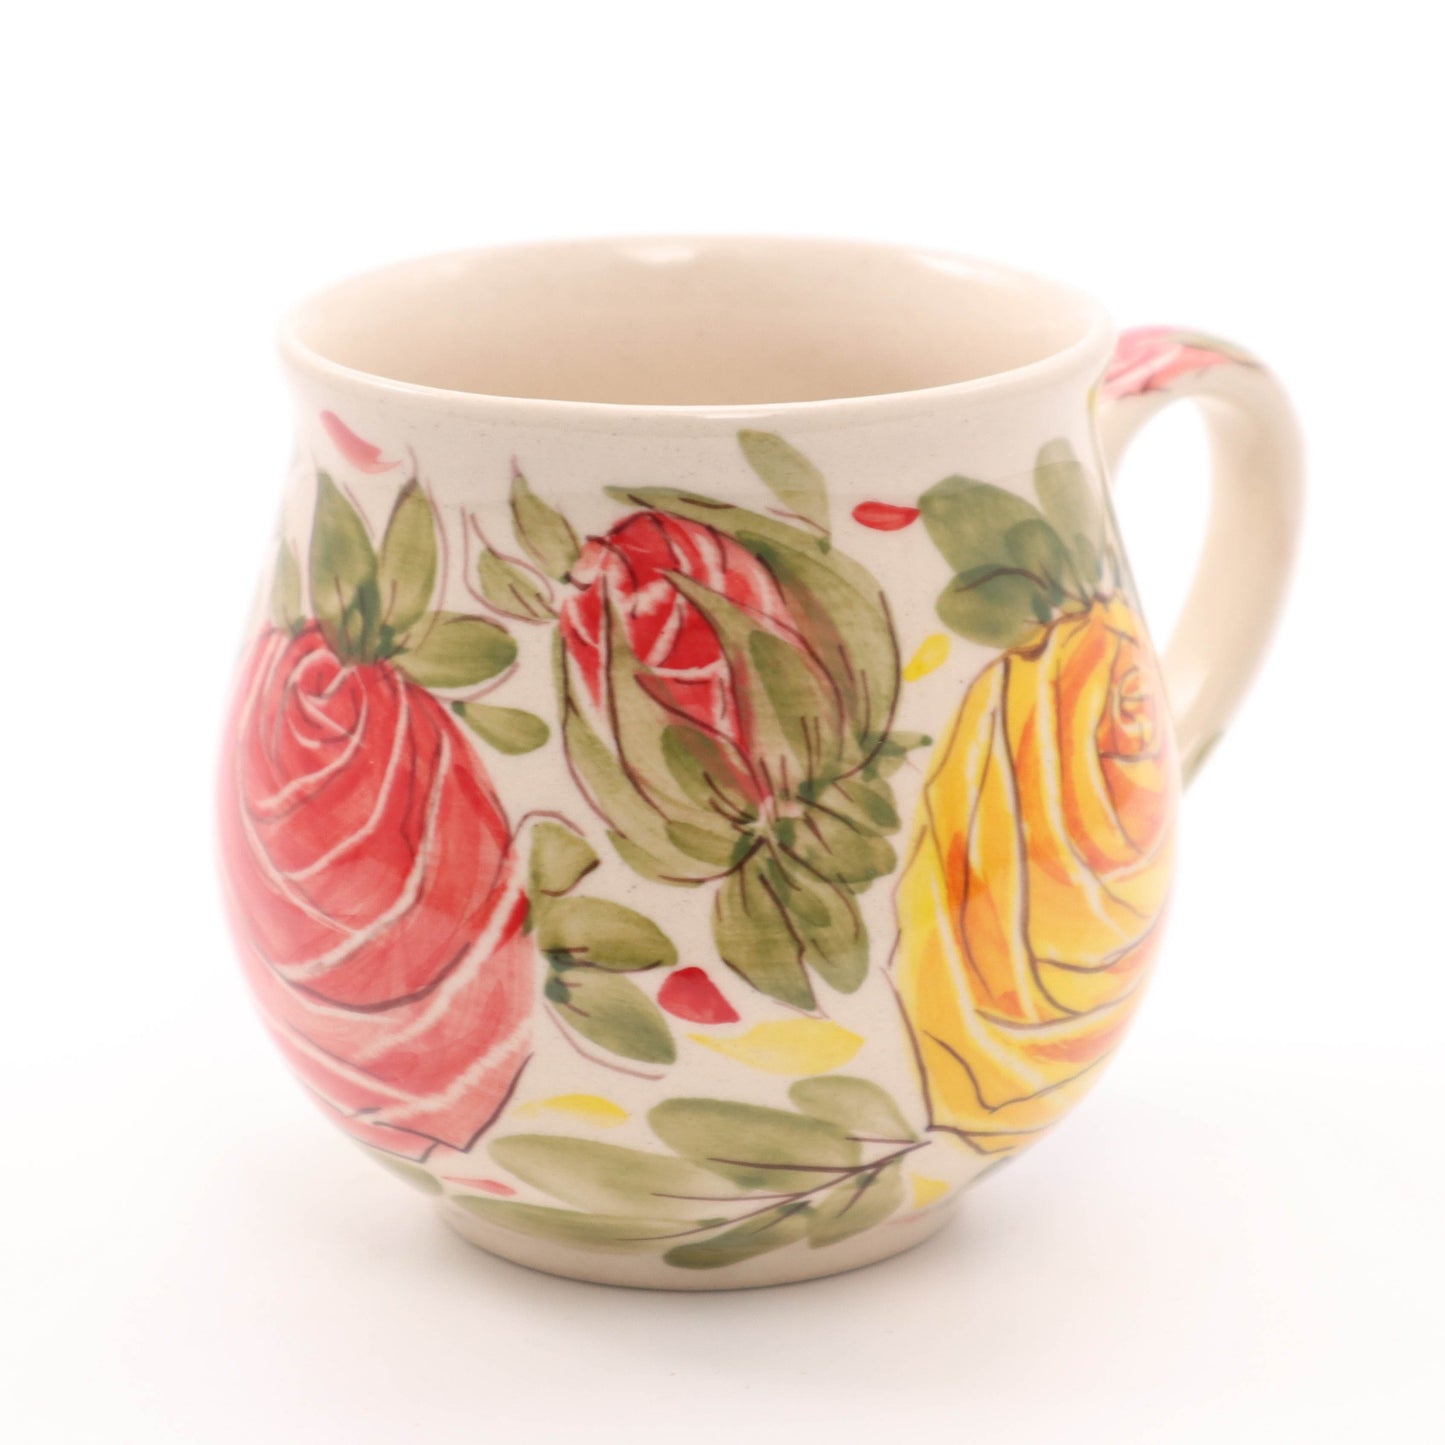 Small Mug Candle. Pattern: A46. Scent: Persimmon